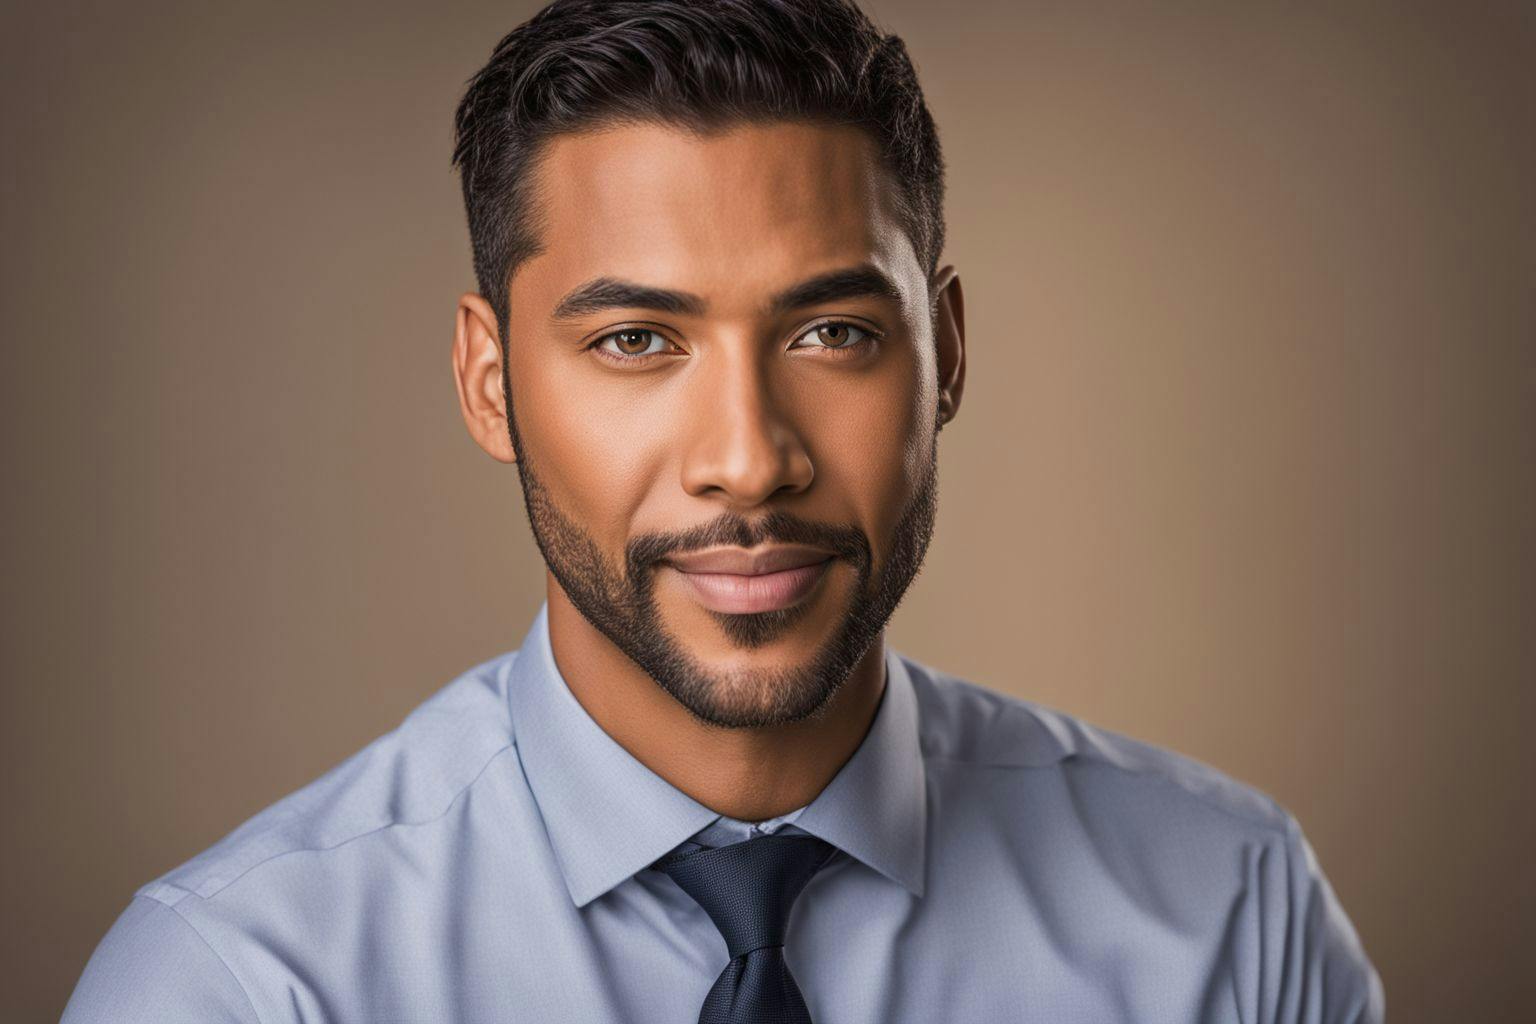 A professional headshot photo of a confident individual, sharply focused, on a solid color background, captured in a well-lit studio using a macro lens, creating a sense of professionalism and sophistication.